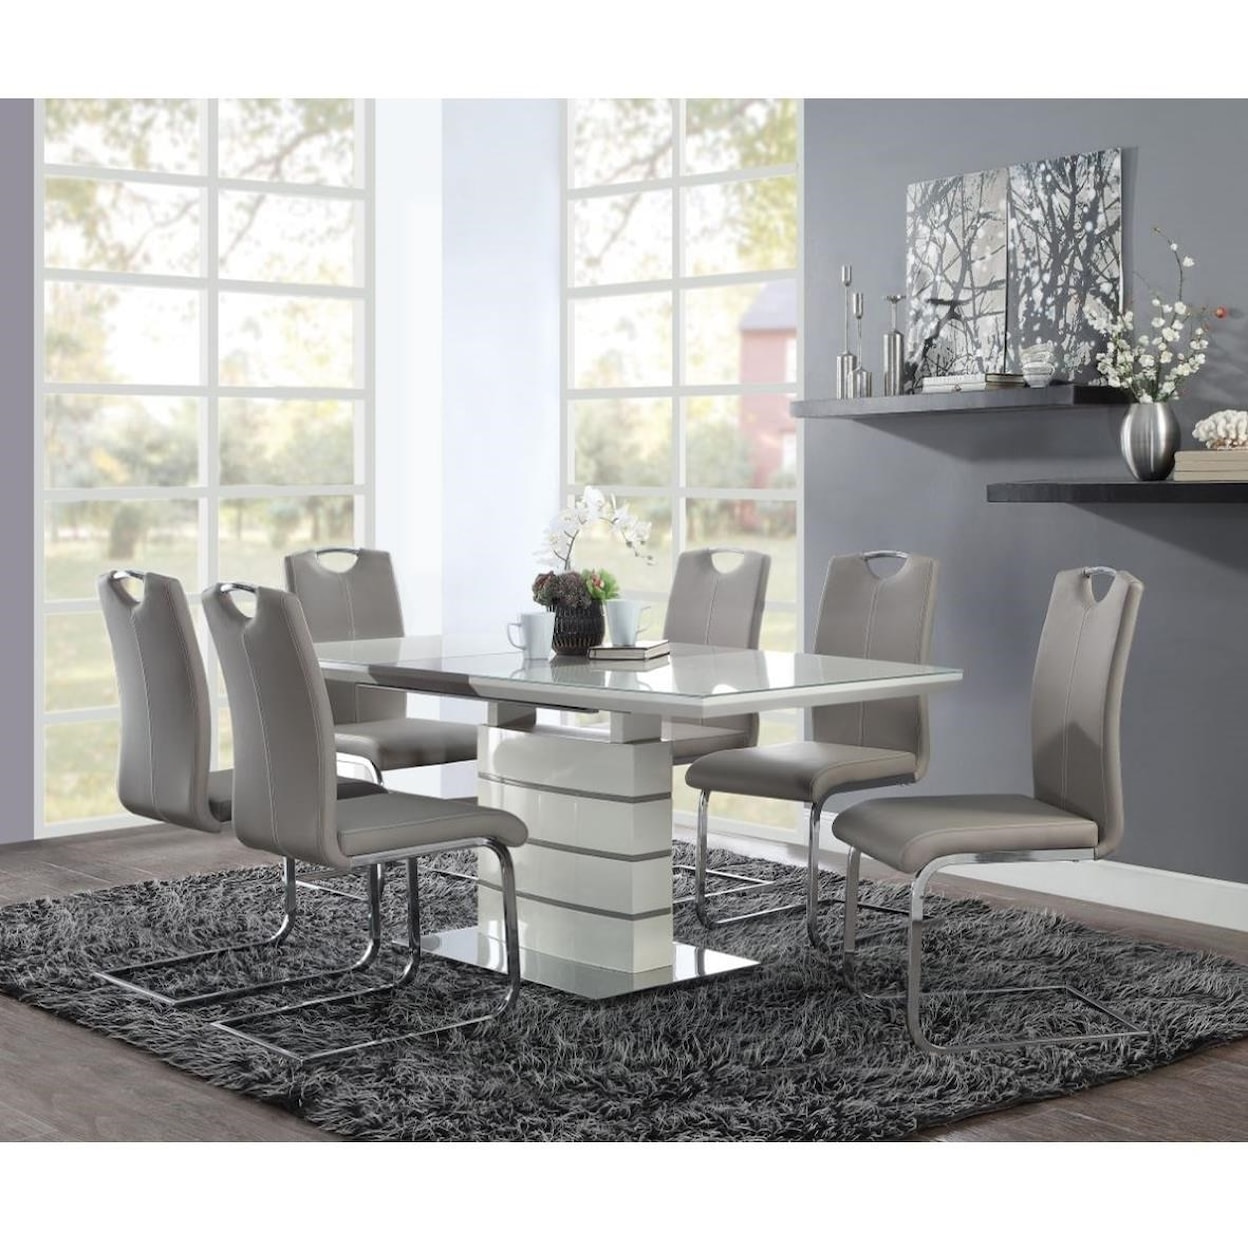 Homelegance Glissand 7-Piece Table and Chair Set